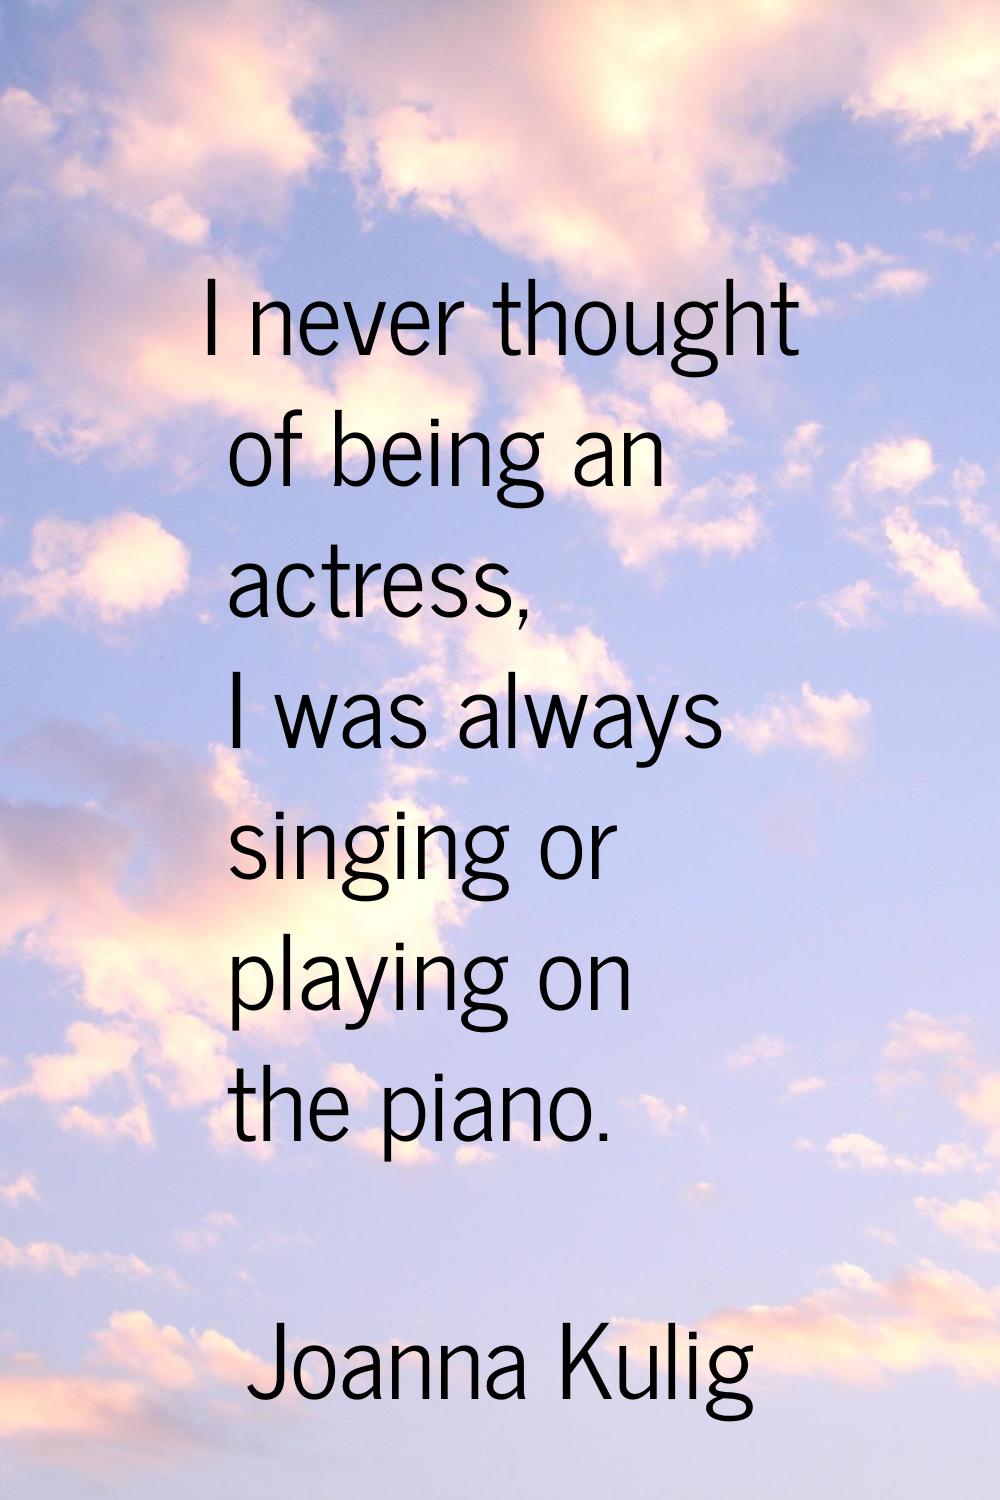 I never thought of being an actress, I was always singing or playing on the piano.